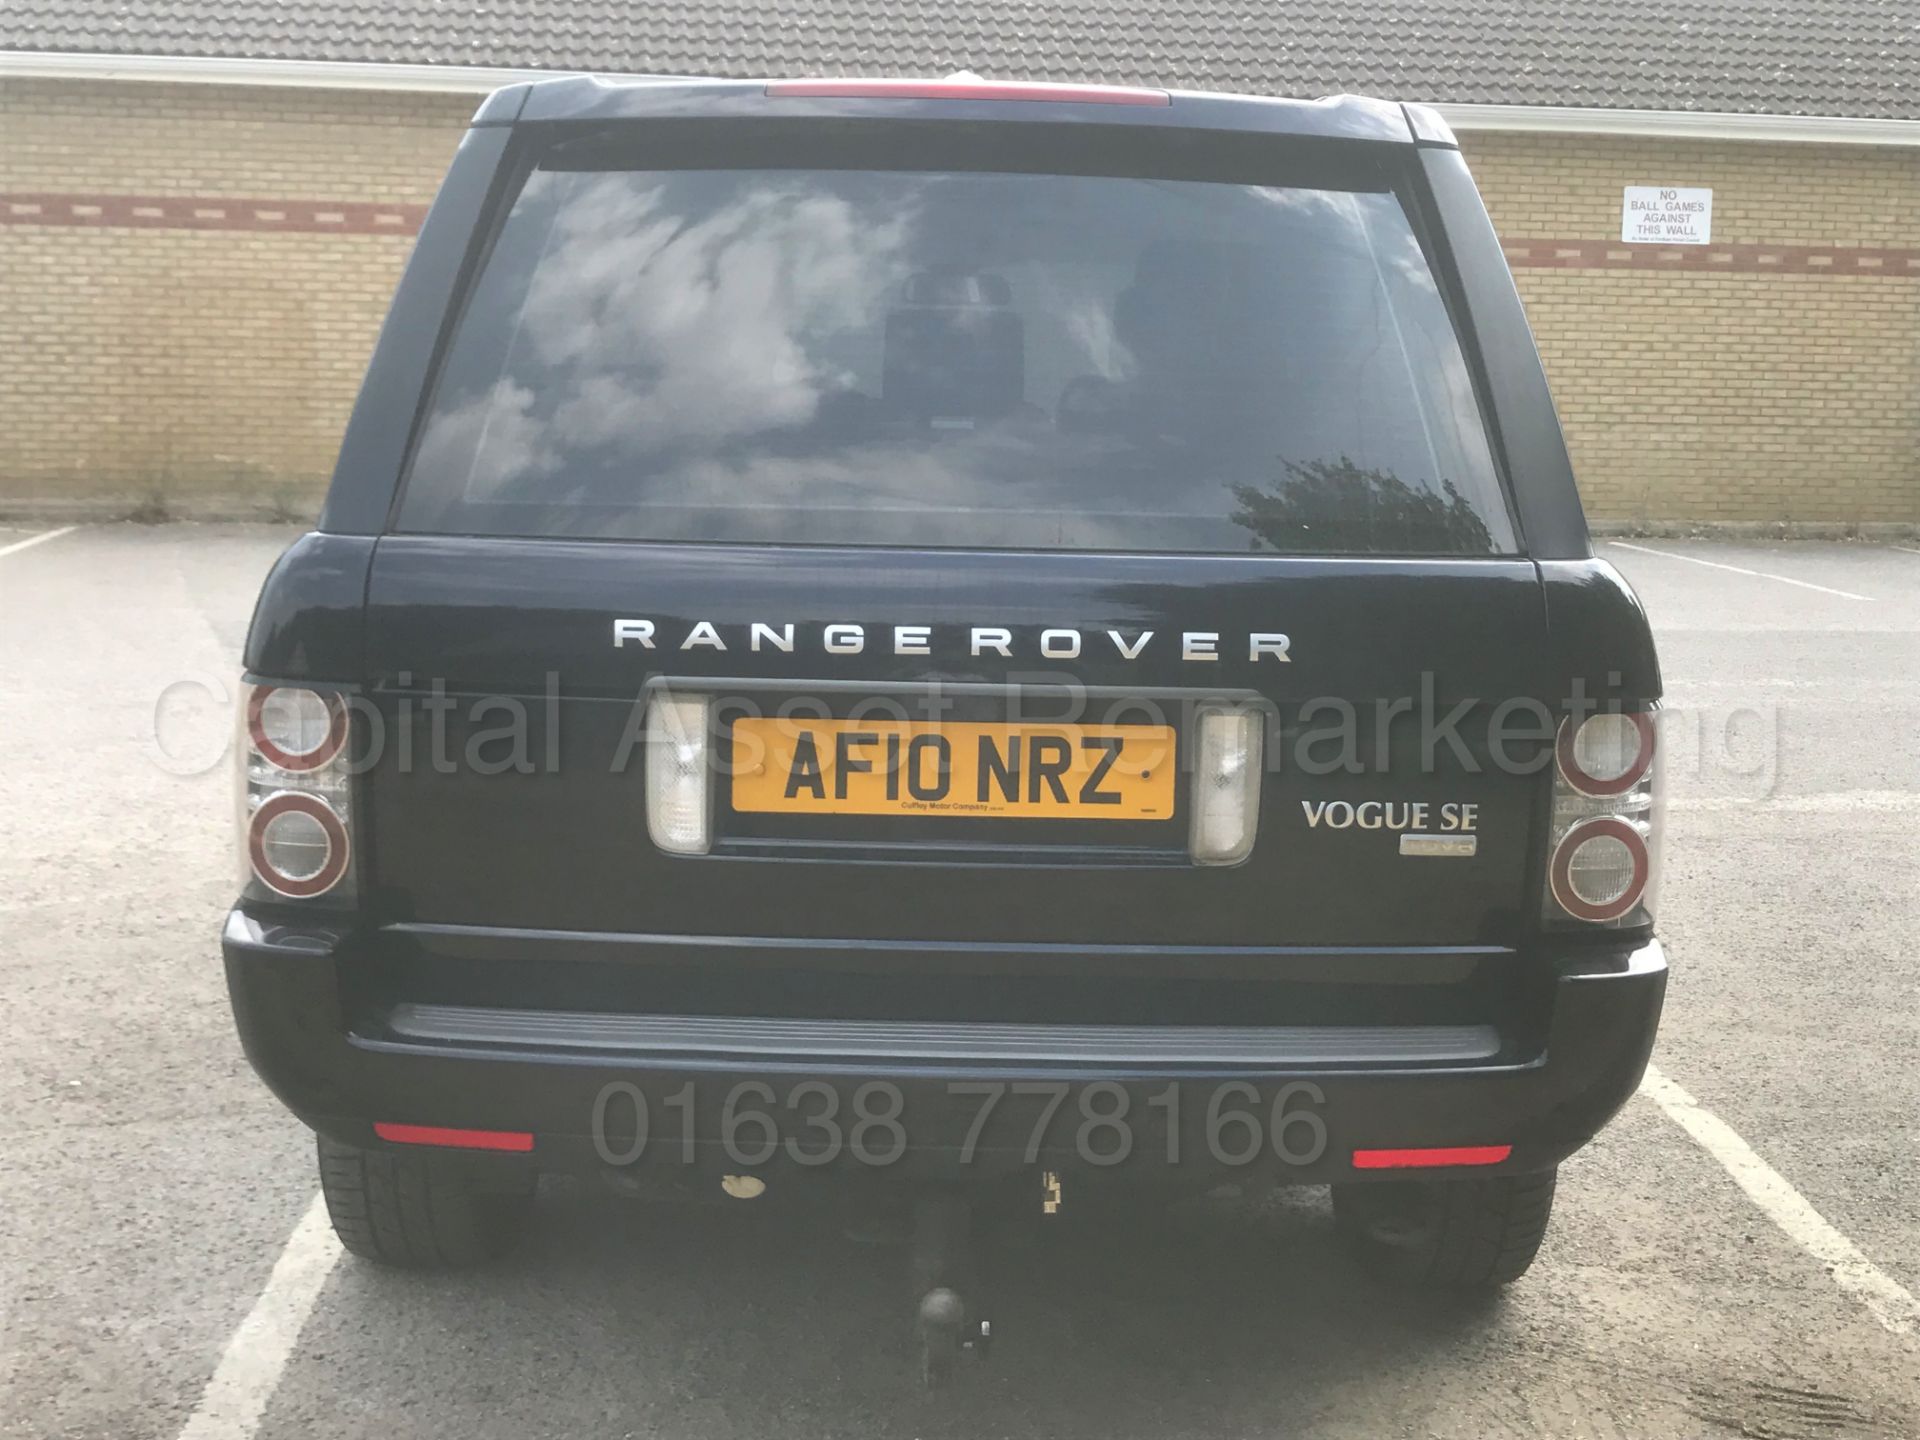 RANGE ROVER VOGUE **SE EDITION** (2010 - FACELIFT EDITION) 'TDV8 - 268 BHP - AUTO' **FULLY LOADED** - Image 10 of 62